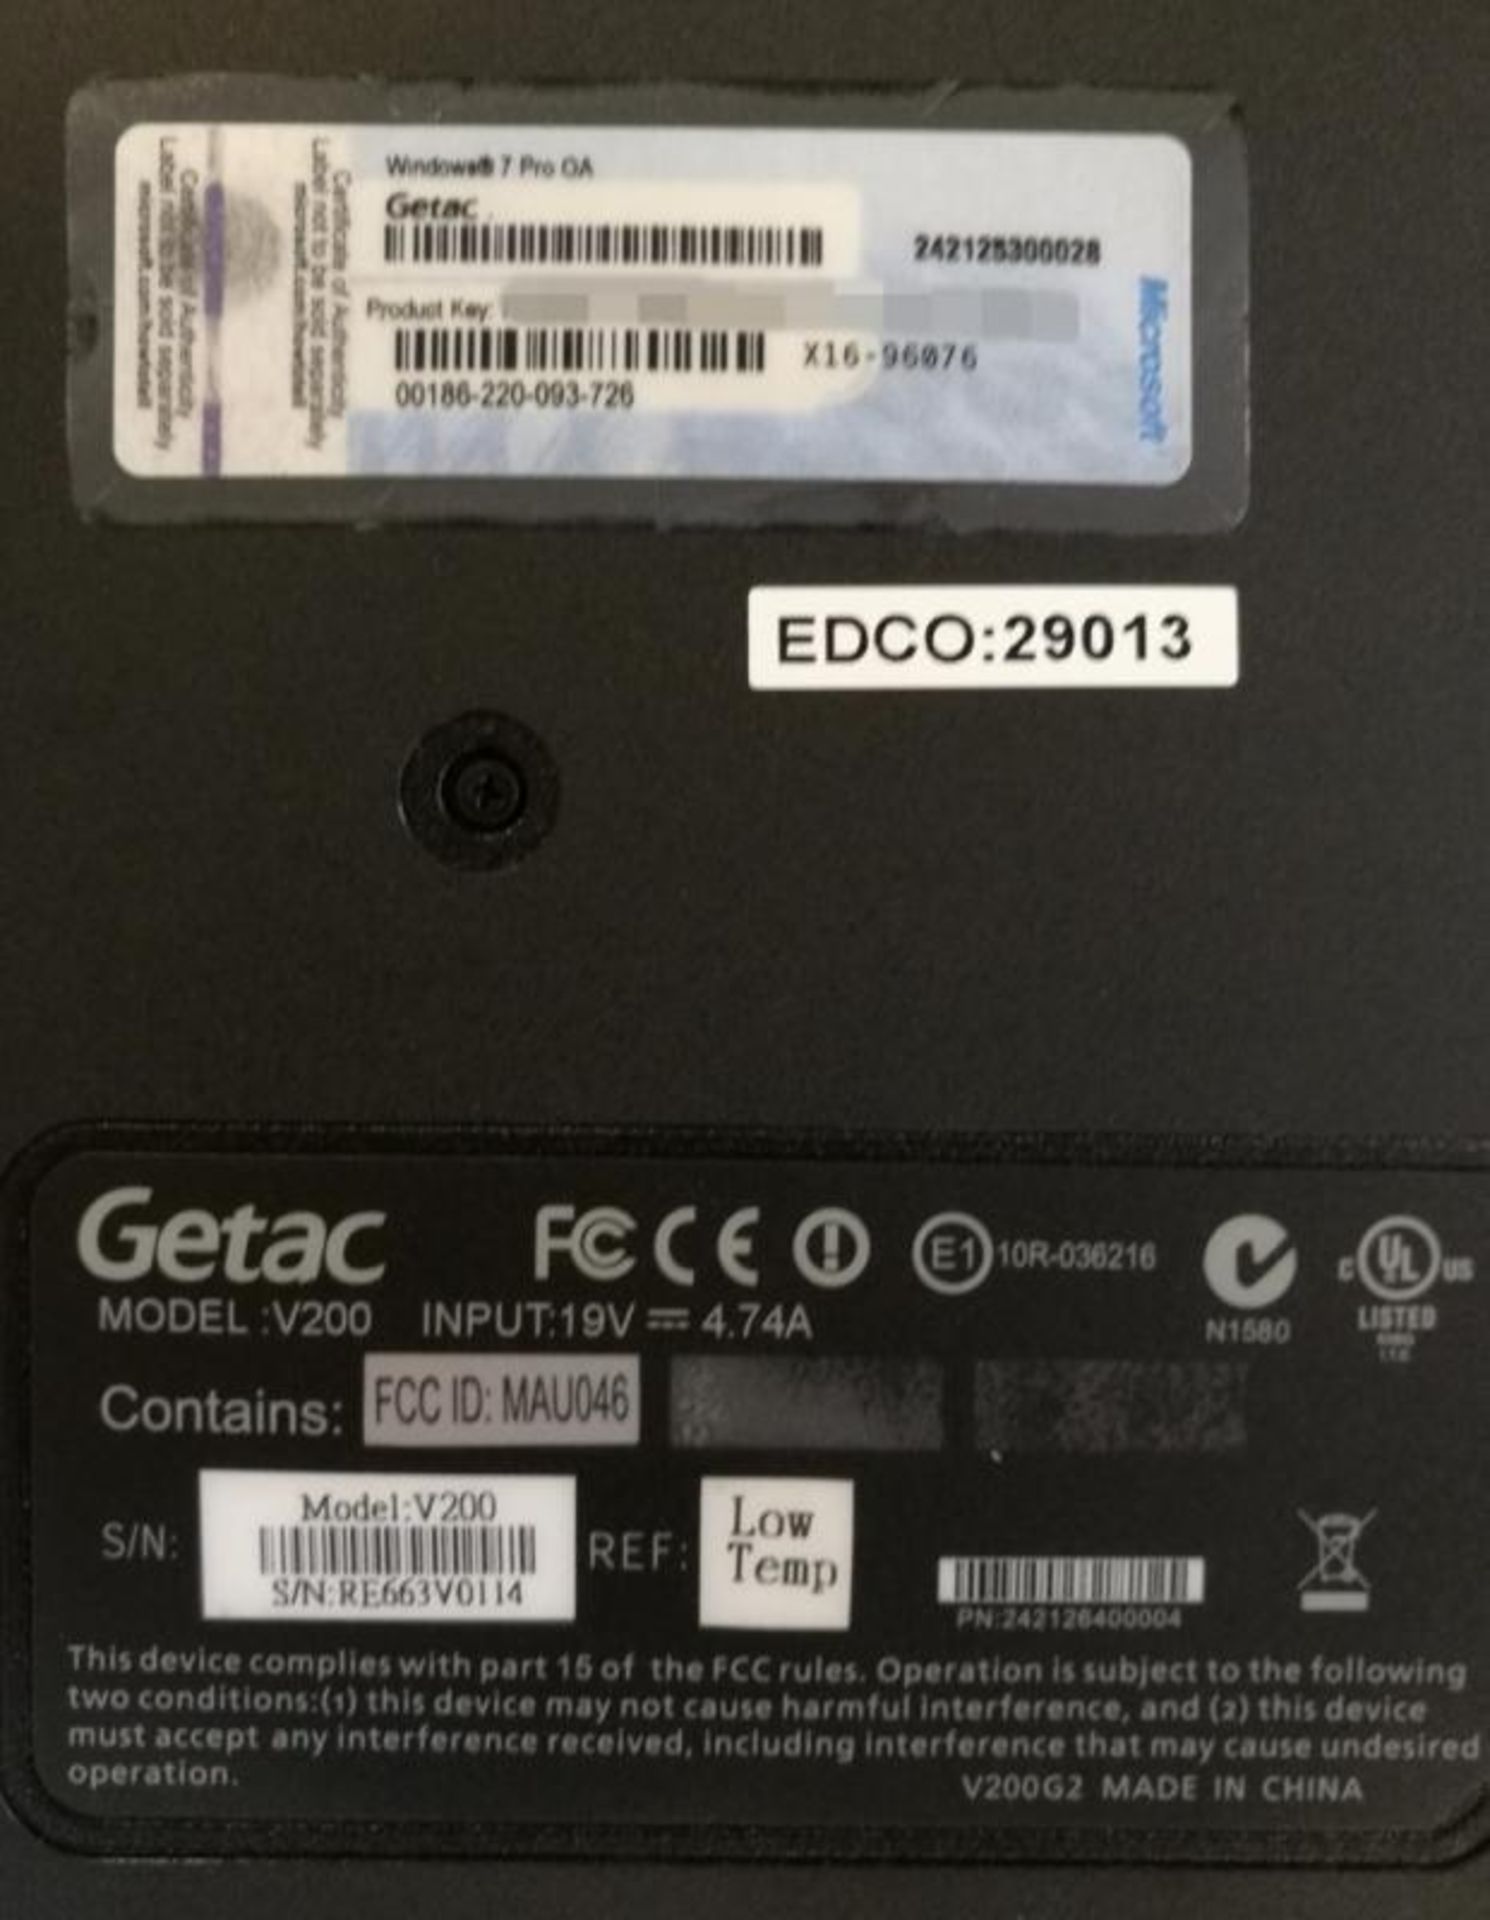 1 x Getac V200 Rugged Laptop Computer - Rugged Laptop That Transforms into a Tablet PC - Features an - Image 5 of 8